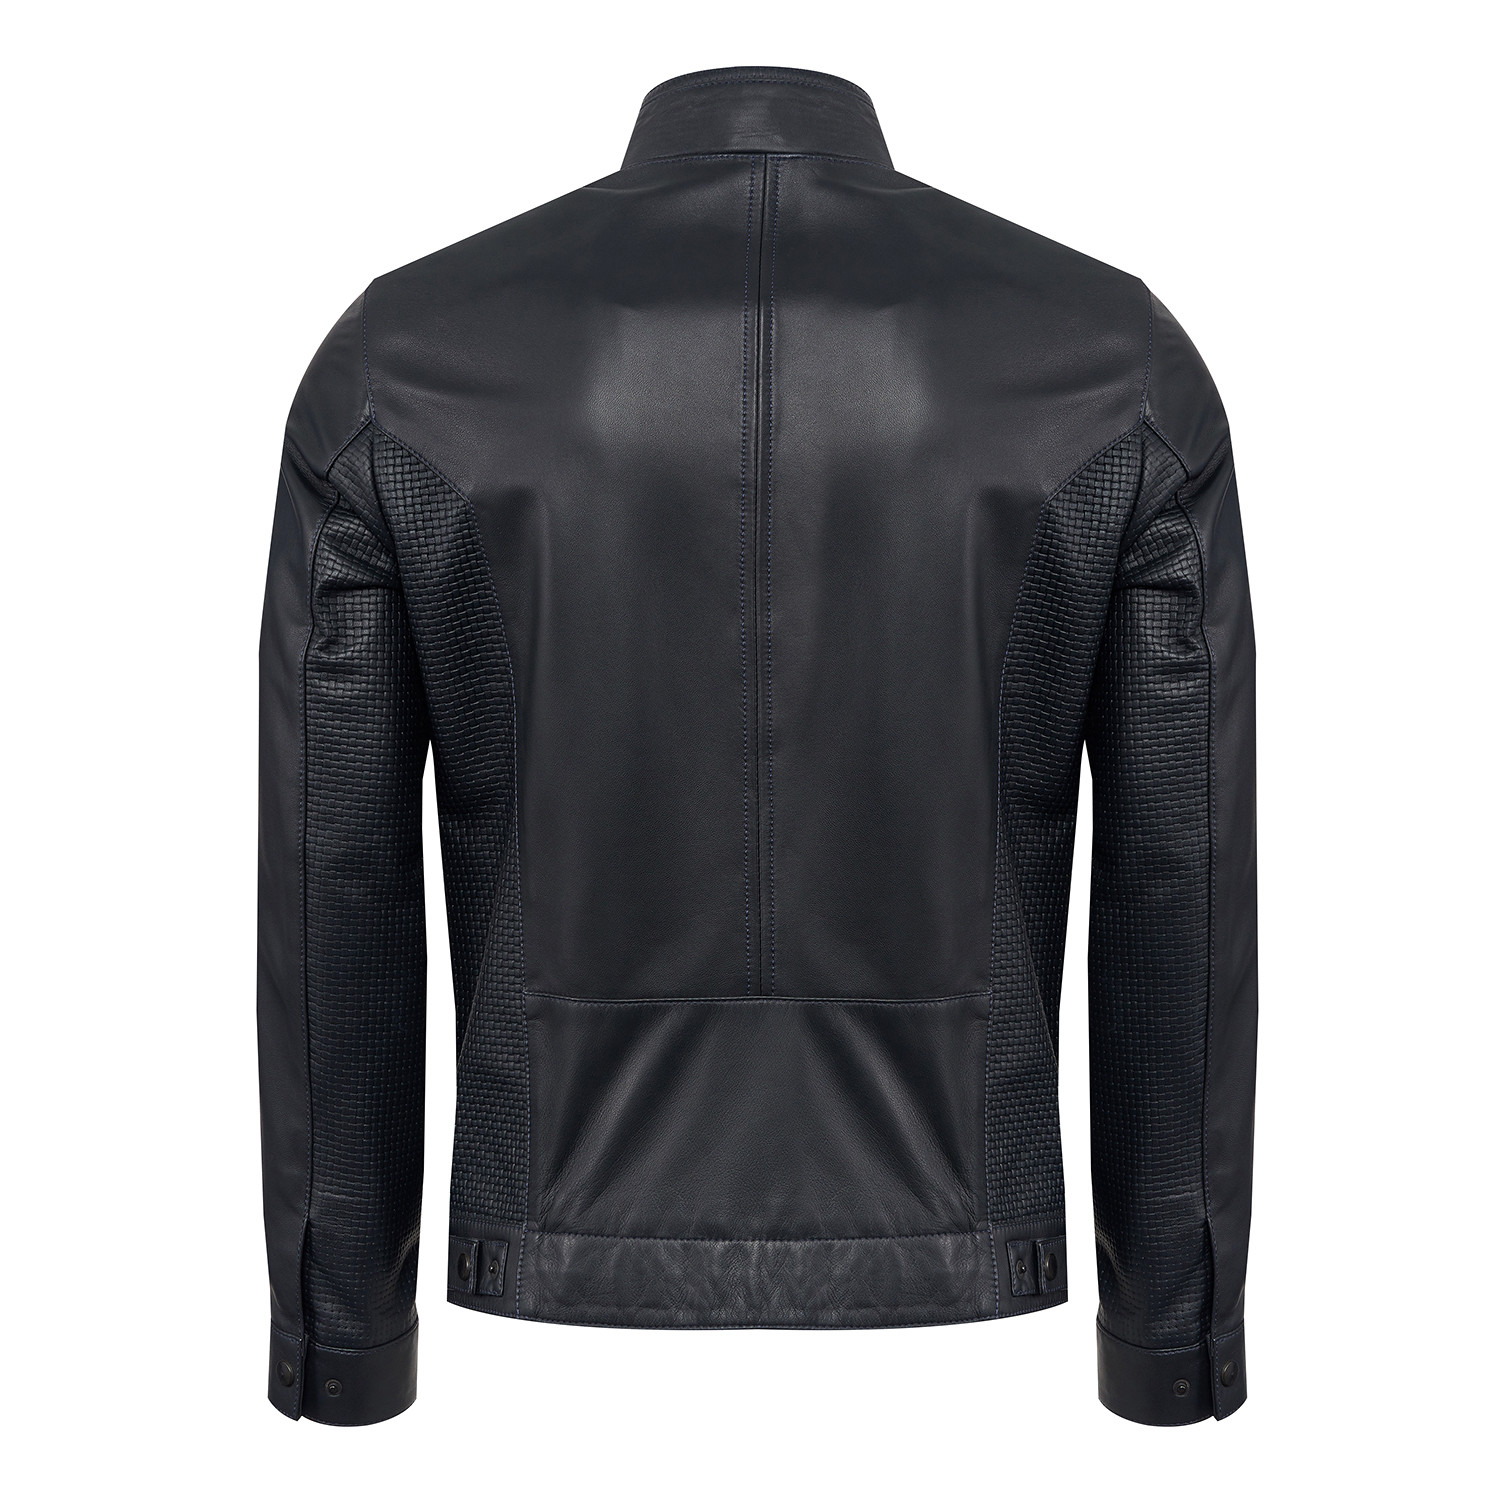 Rufus Leather Jacket Slim Fit // Black + Navy Lining (S) - Ruck & Maul ...